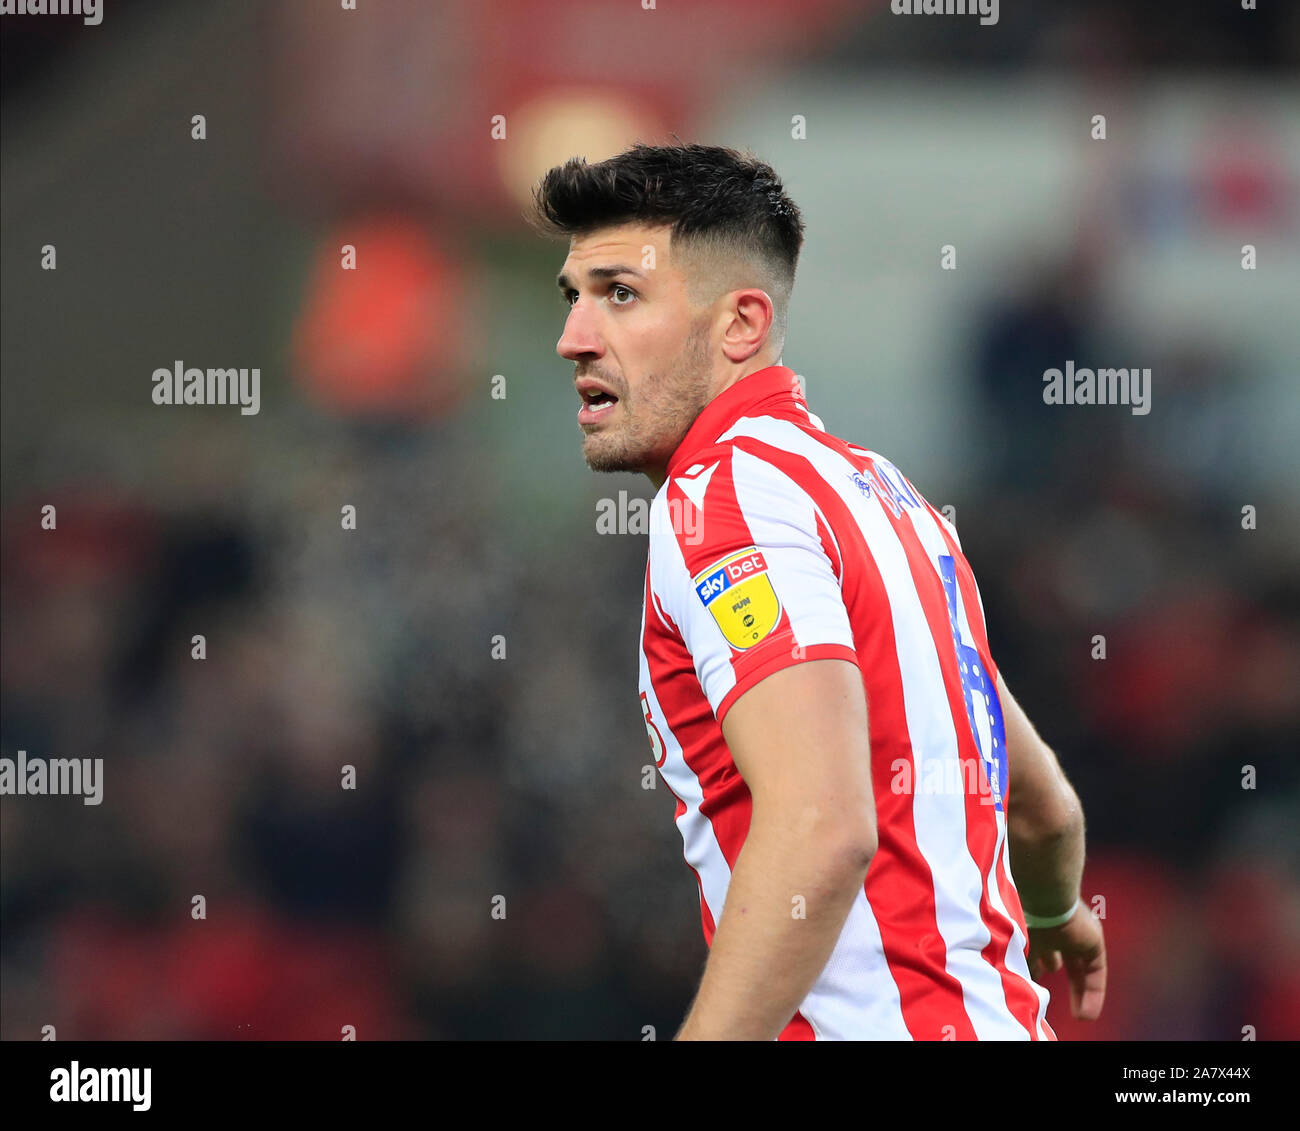 4th November 2019, Bet365 Stadium, Stoke-on-Trent, England; Sky Bet Championship, Stoke City v West Bromwich Albion : Danny Baath (6) of Stoke City  Credit: Conor Molloy/News Images Stock Photo